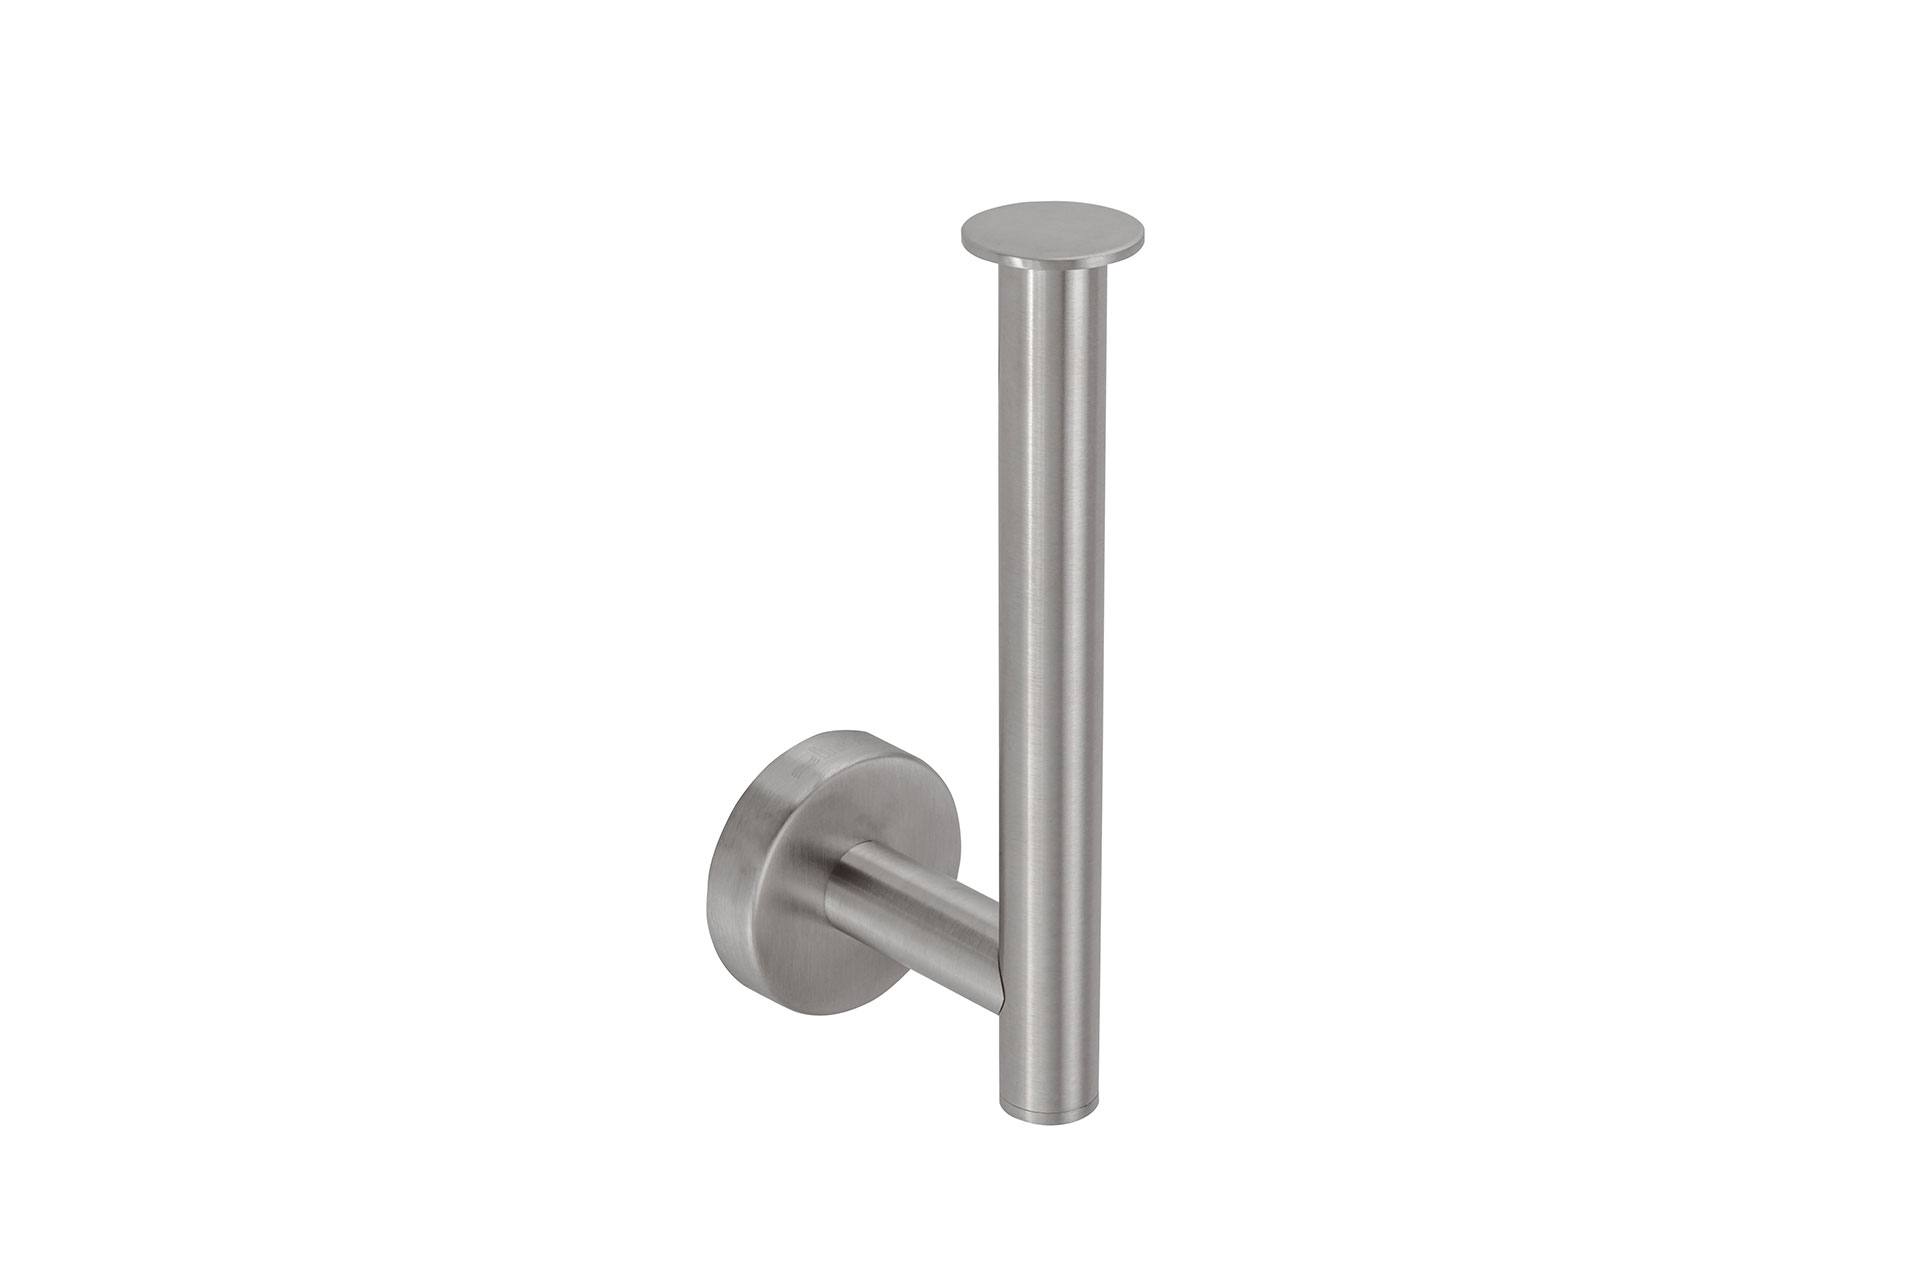 Toilet paper holder with reserve